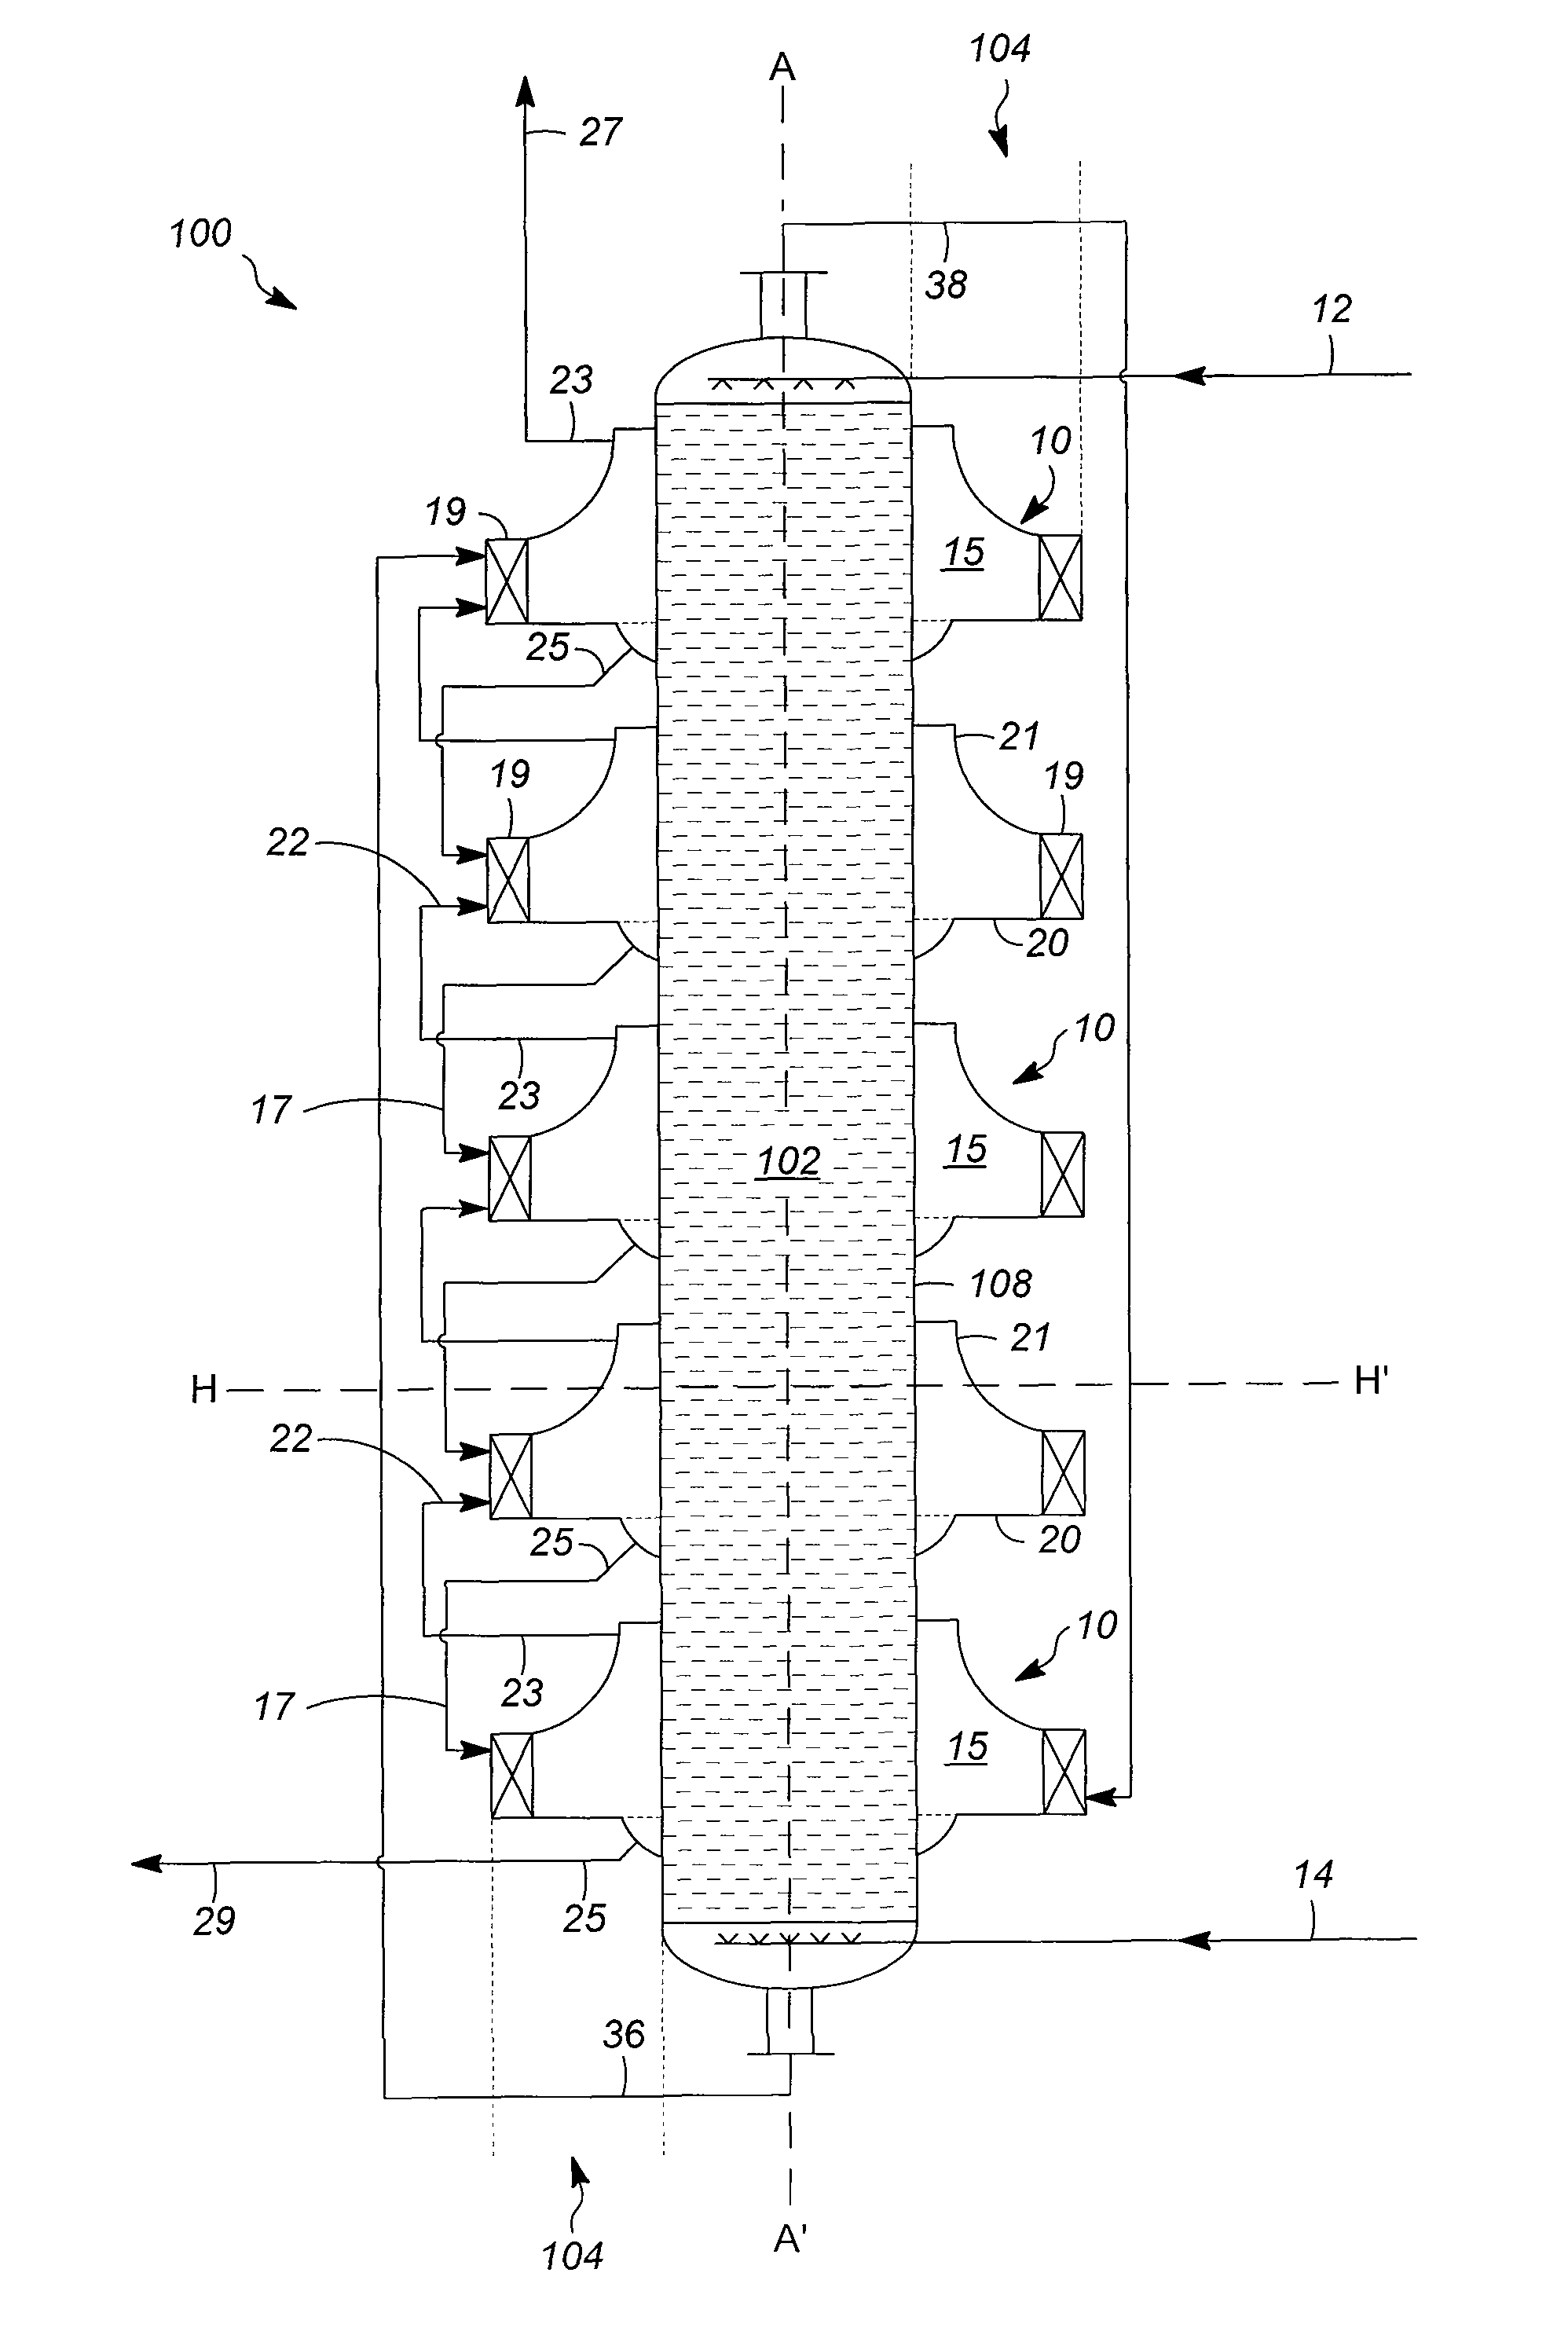 Vapor-liquid contacting apparatuses having a secondary absorption zone with vortex contacting stages